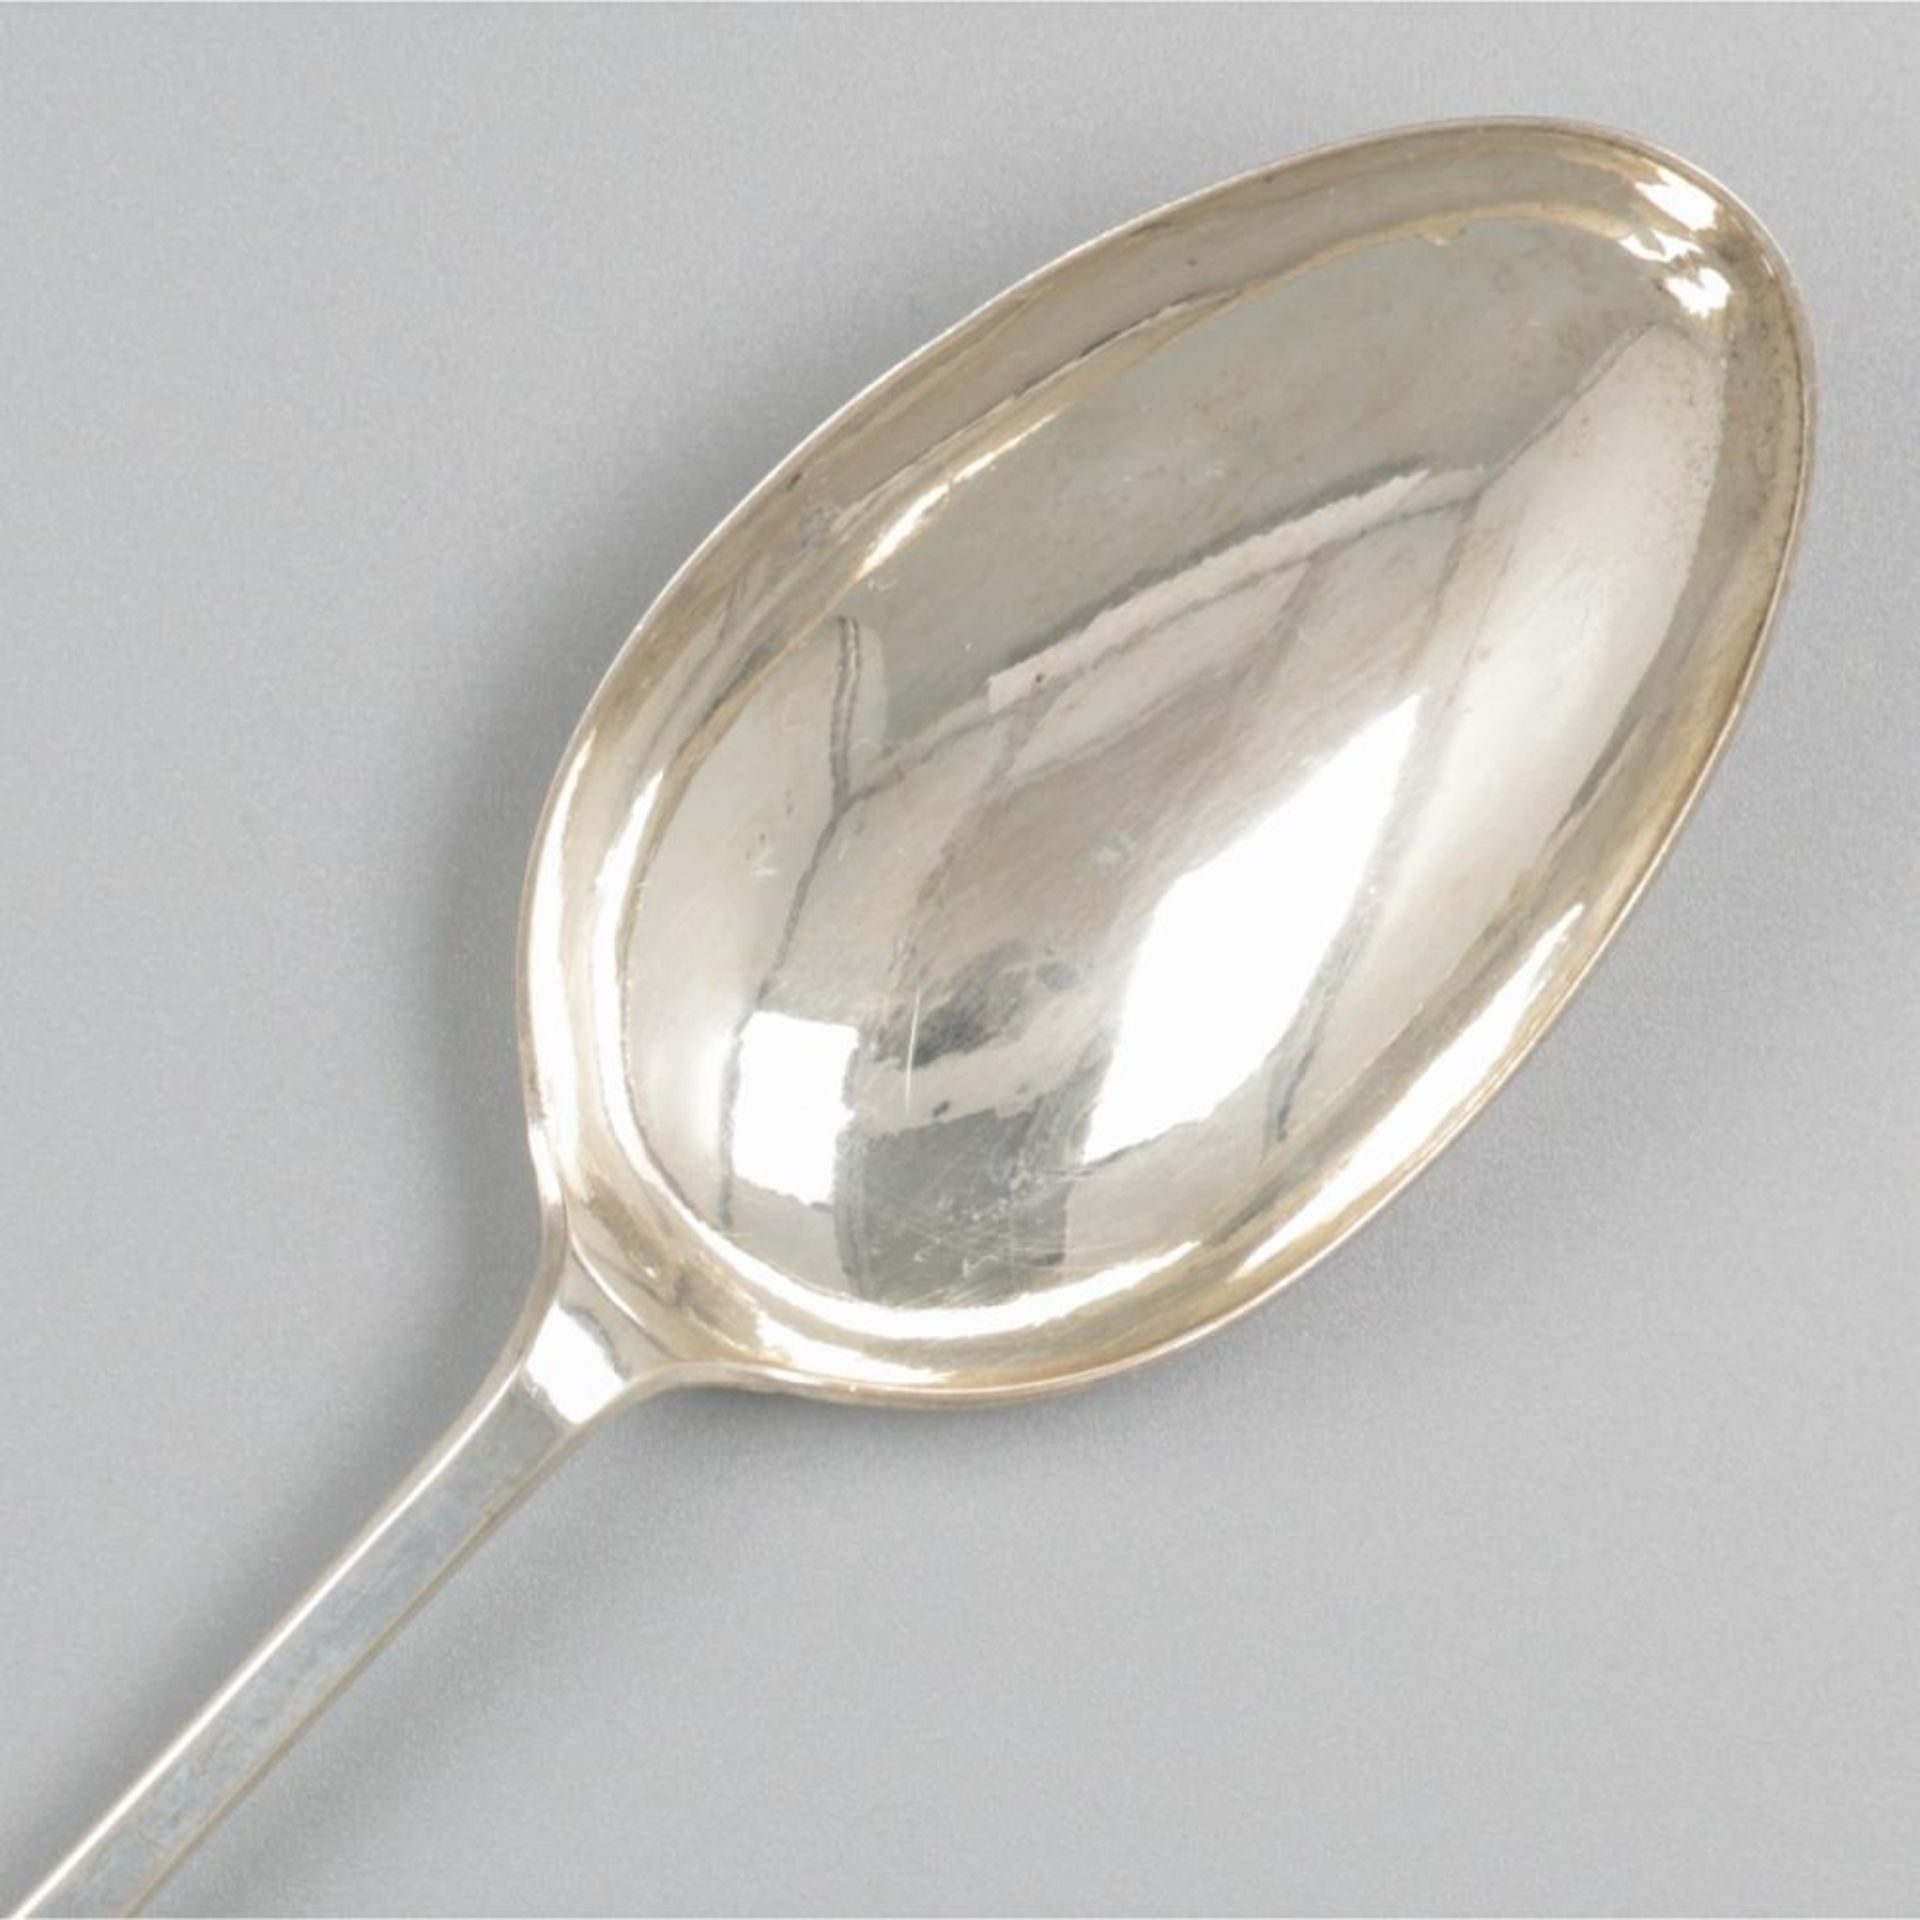 Spoon (Netherlands 18th century) silver. - Image 3 of 6